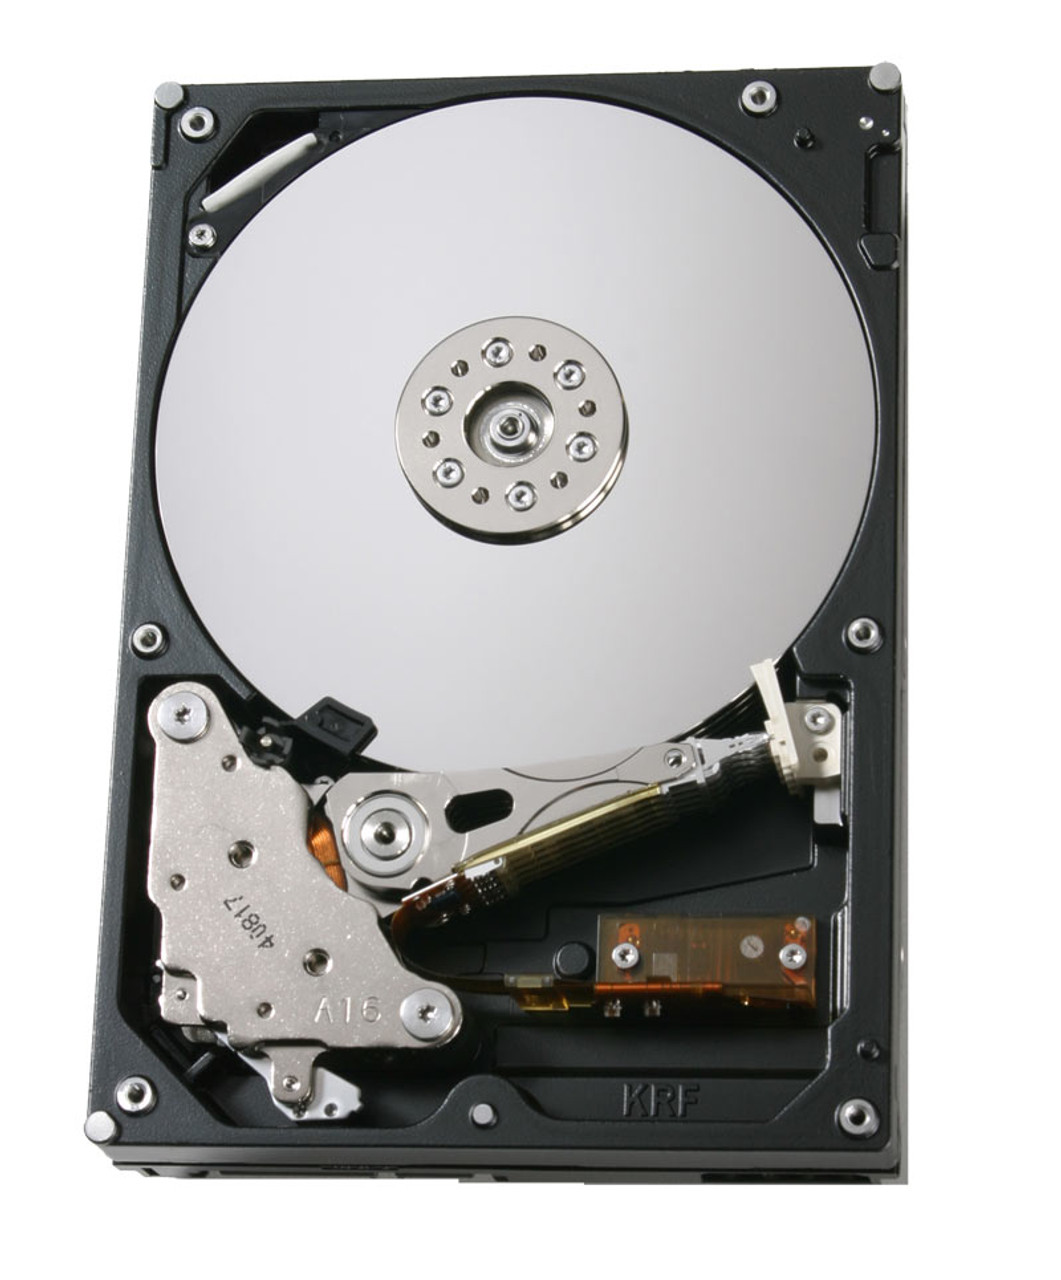 【パーツ】3.5 SATA 3TB 1台 正常 Hitachi HDS723030ALA640 使用時間63048H ■HDD1385